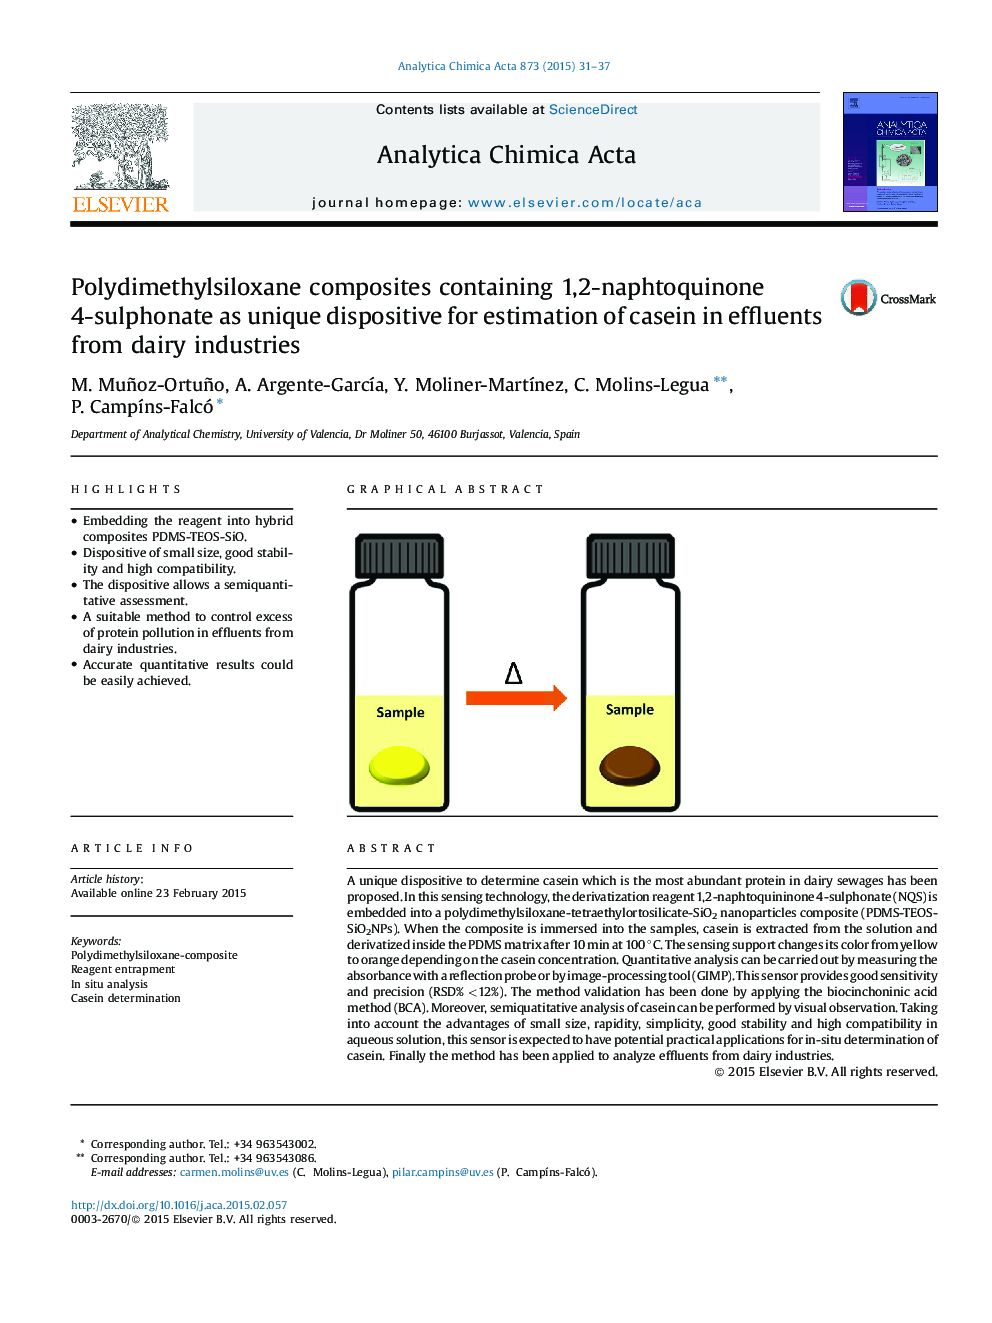 Polydimethylsiloxane composites containing 1,2-naphtoquinone 4-sulphonate as unique dispositive for estimation of casein in effluents from dairy industries